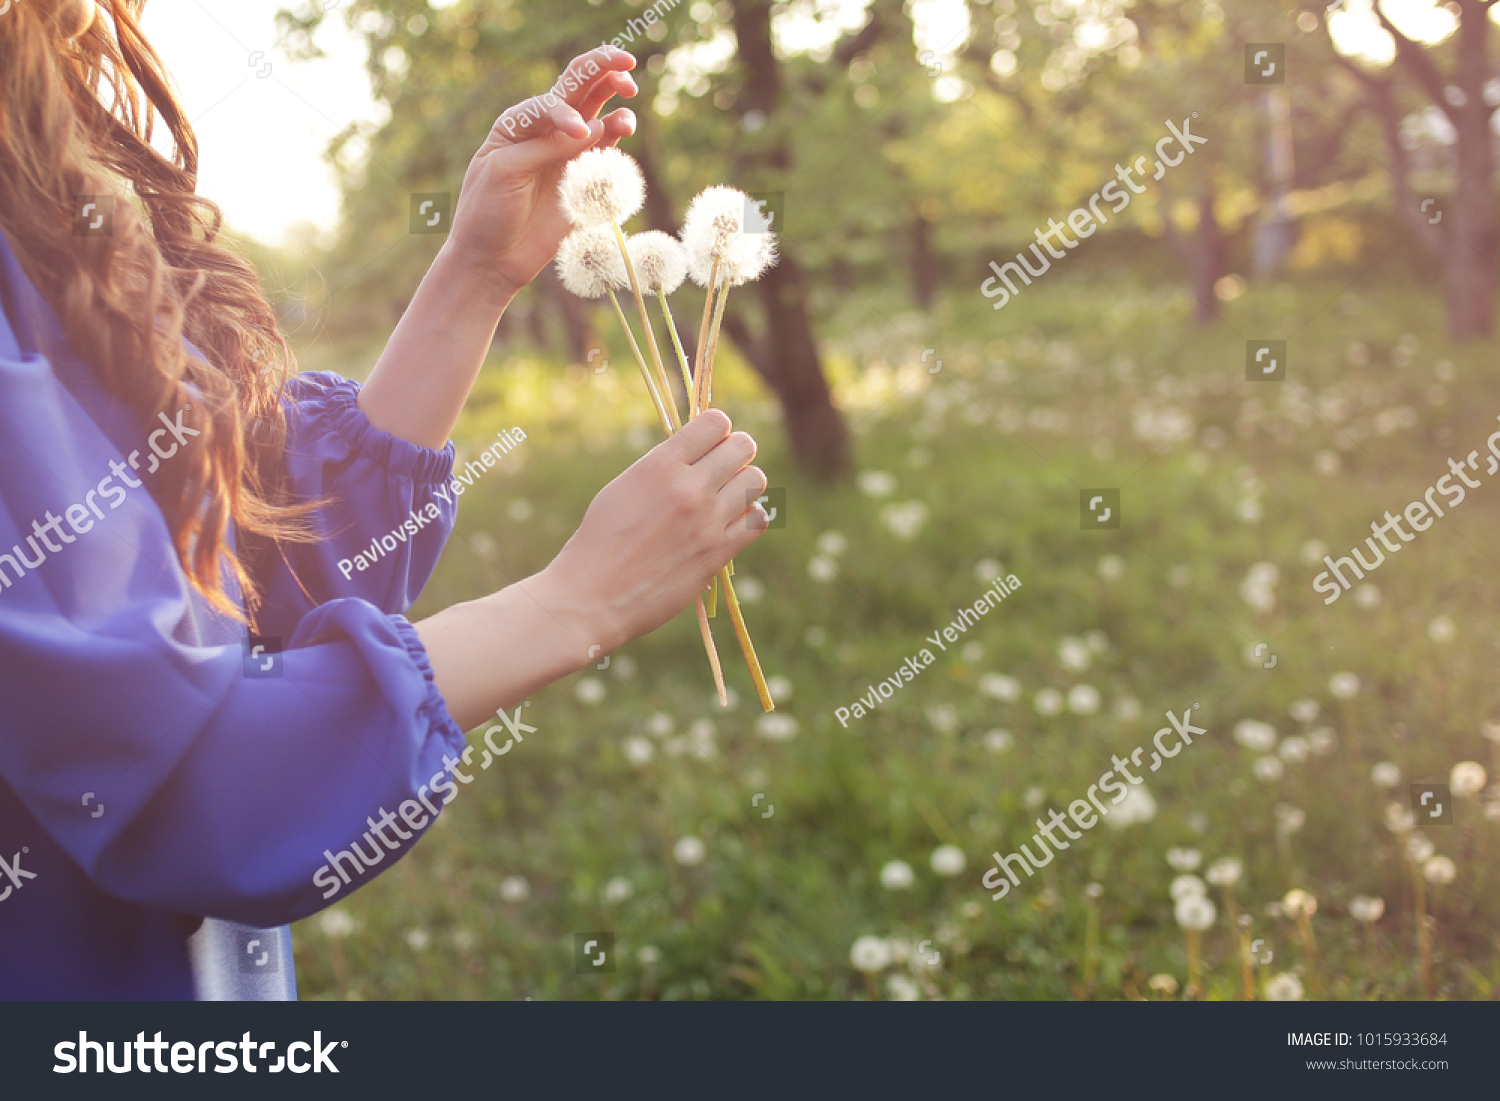 Young spring fashion woman blowing dandelion in spring garden. Springtime. Trendy girl at sunset in spring landscape background. Allergic to pollen of flowers. Spring allergy #1015933684